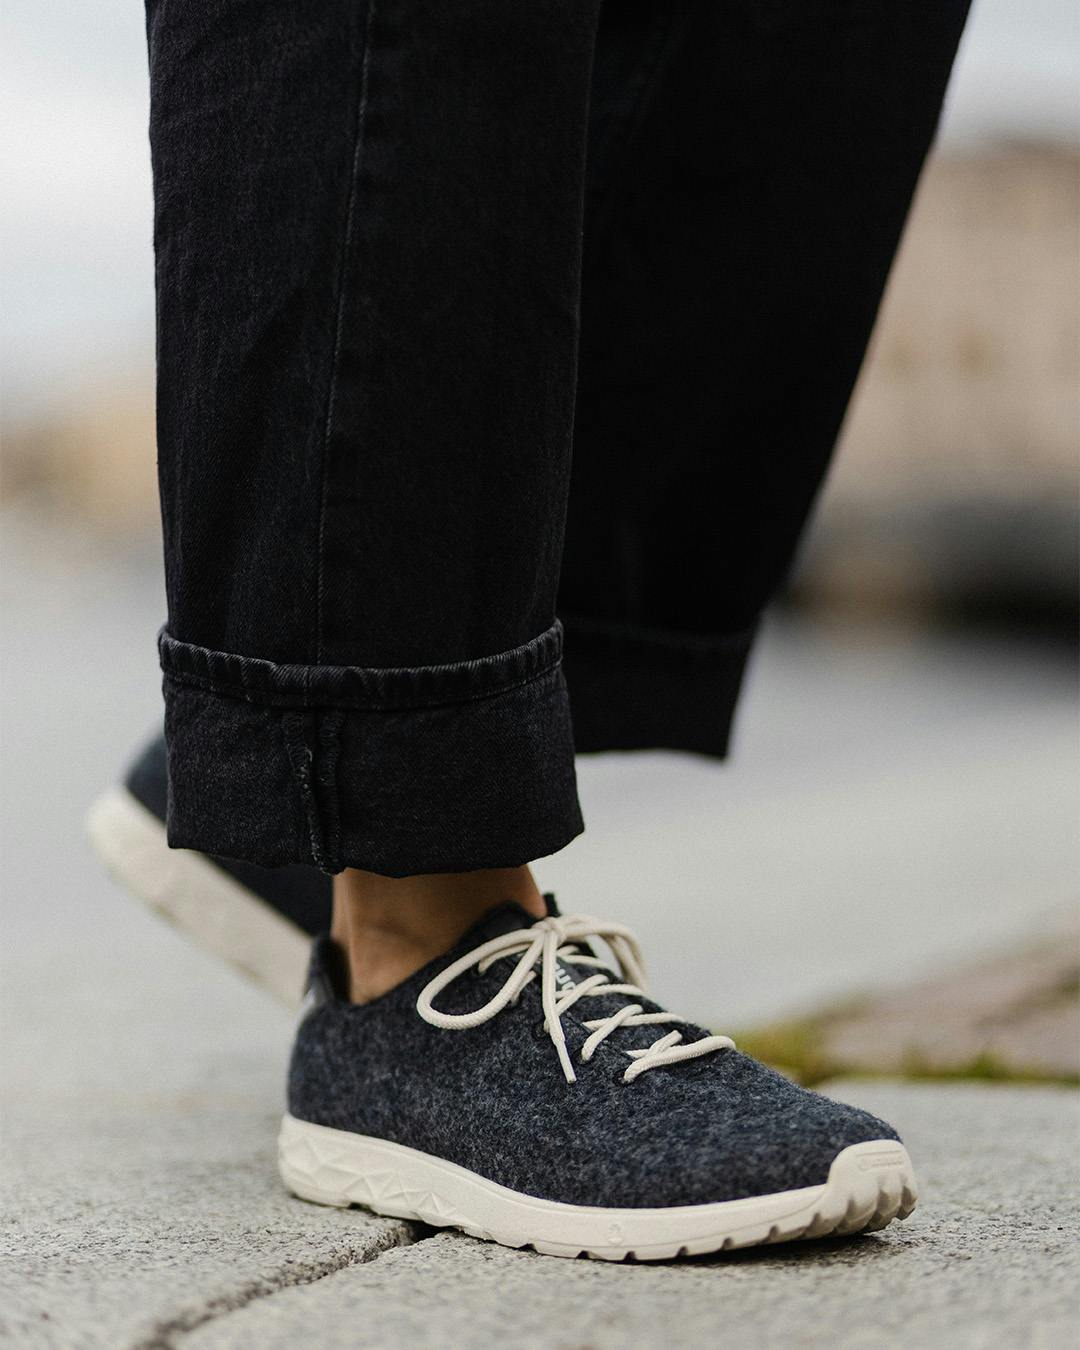 A person in Icebug wool sneakers and black jeans.